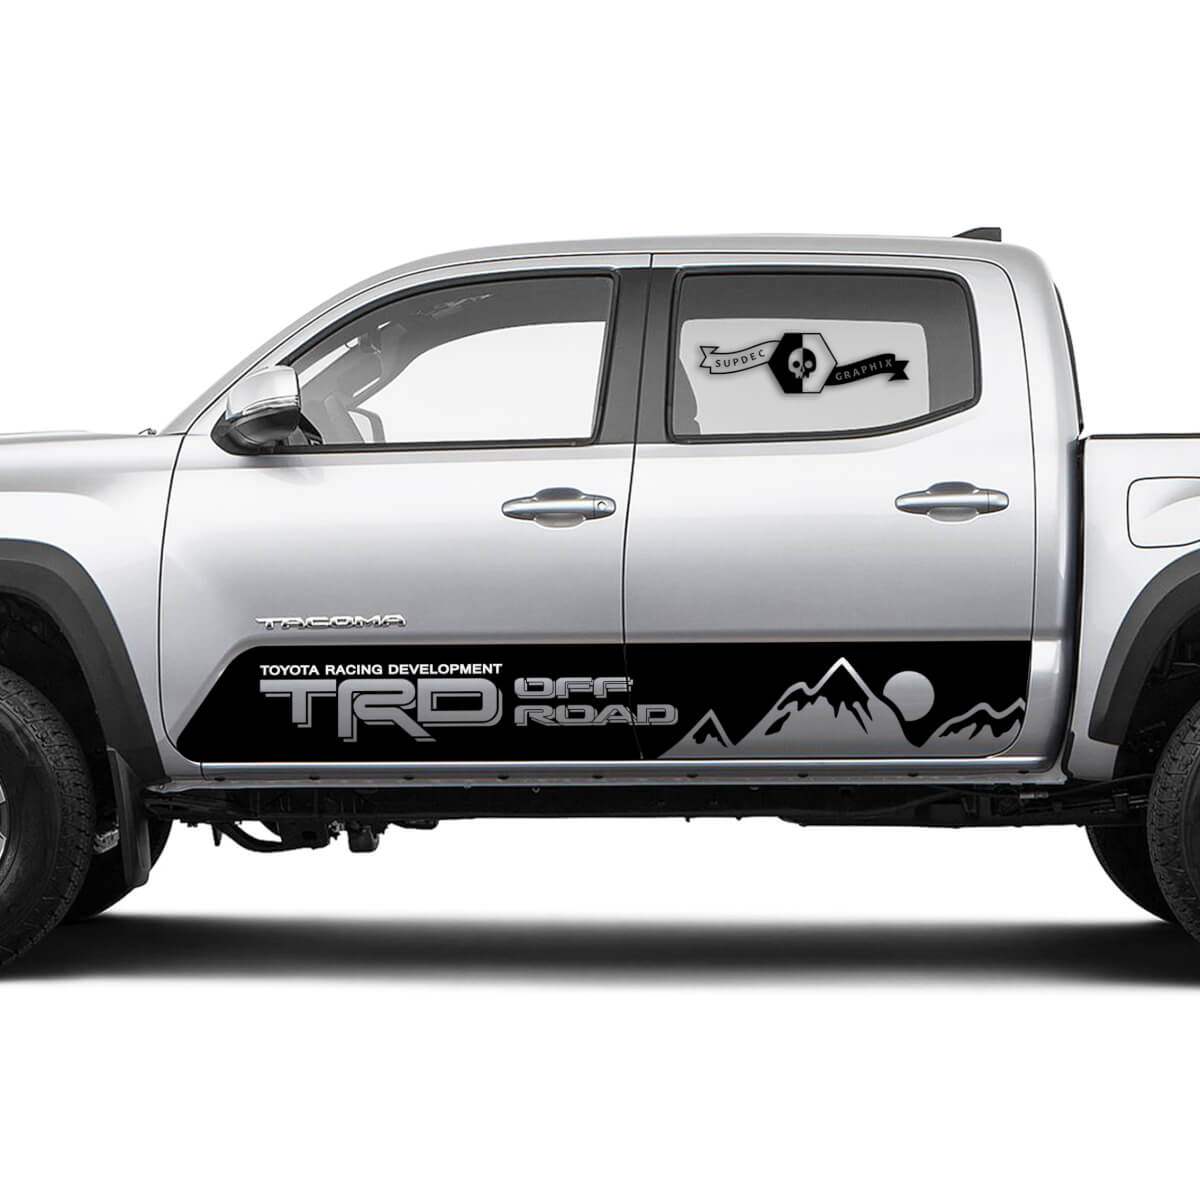 TRD Off Road TOYOTA Mountains Sun Moon stripes Decals Stickers for Tacoma Tundra 4Runner Hilux Doors